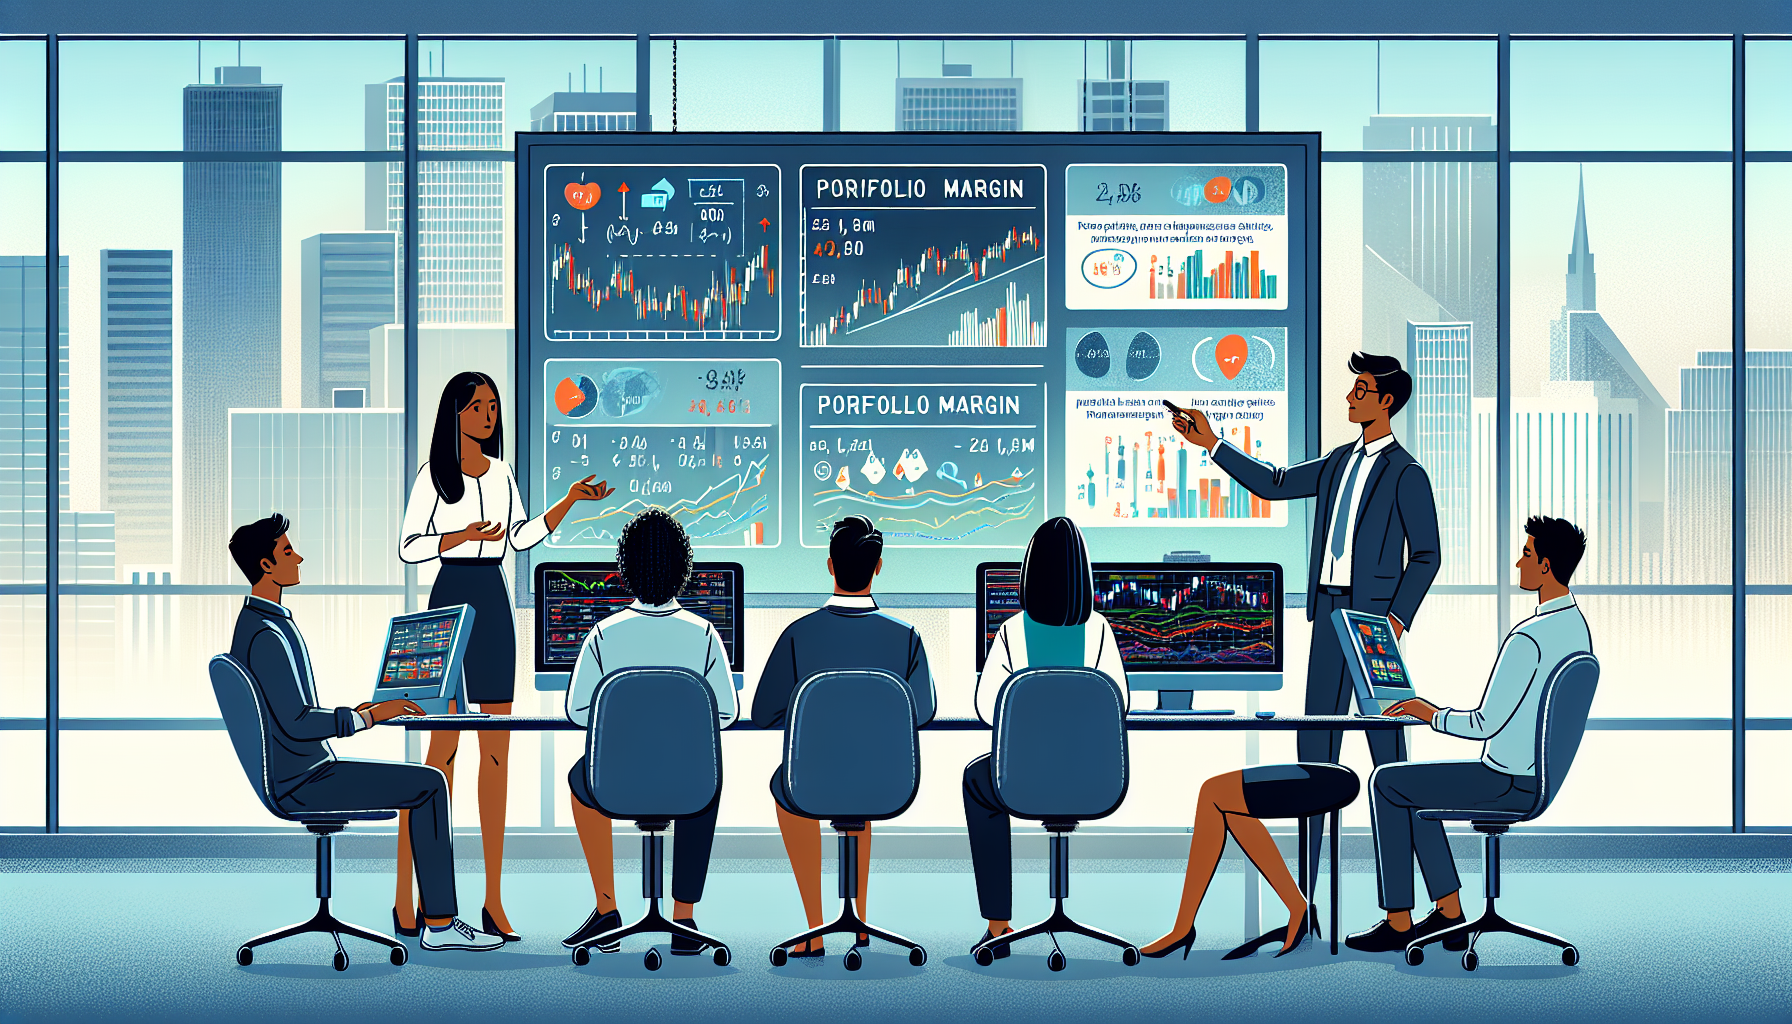 Create an image of a financial analyst explaining the concept of portfolio margin to a diverse group of investors in a modern office setting. The background should include computer screens displaying stock charts and graphs, and whiteboards with equations and risk analysis. The atmosphere should convey complexity and clarity, showing how portfolio margin can optimize investments.